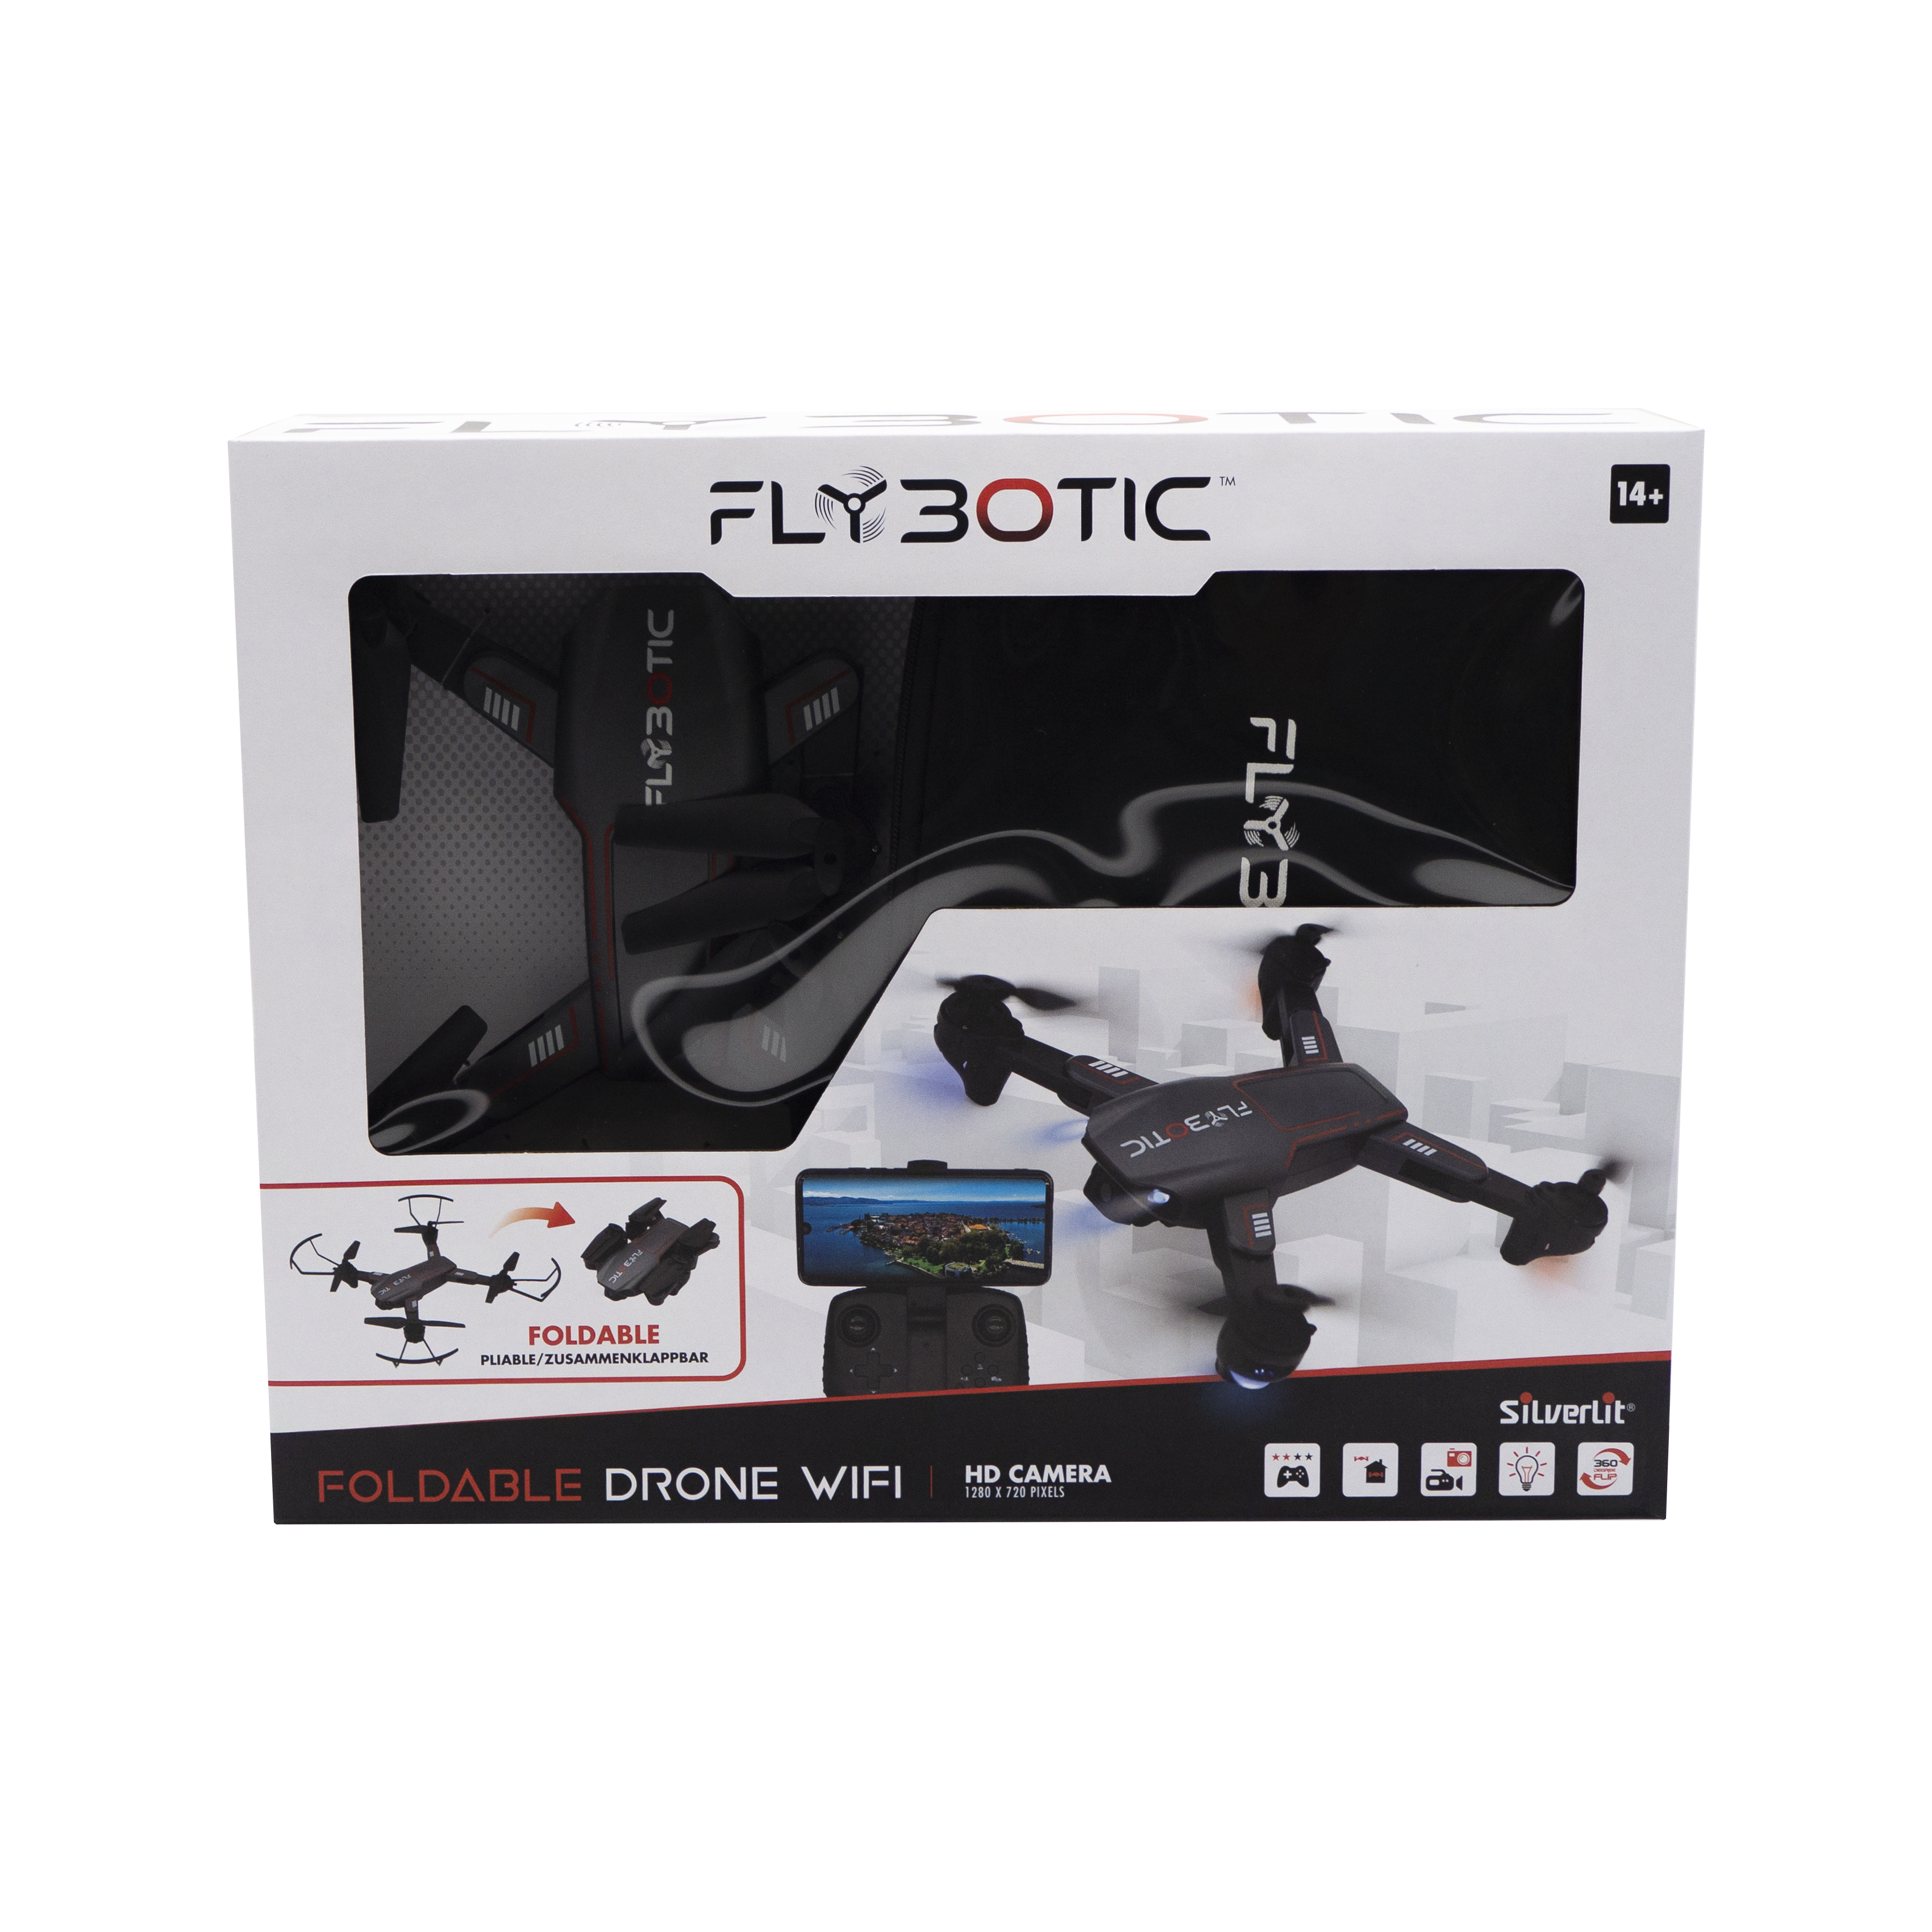 FLYBOTIC FOLDABLE DRONE - 905014 